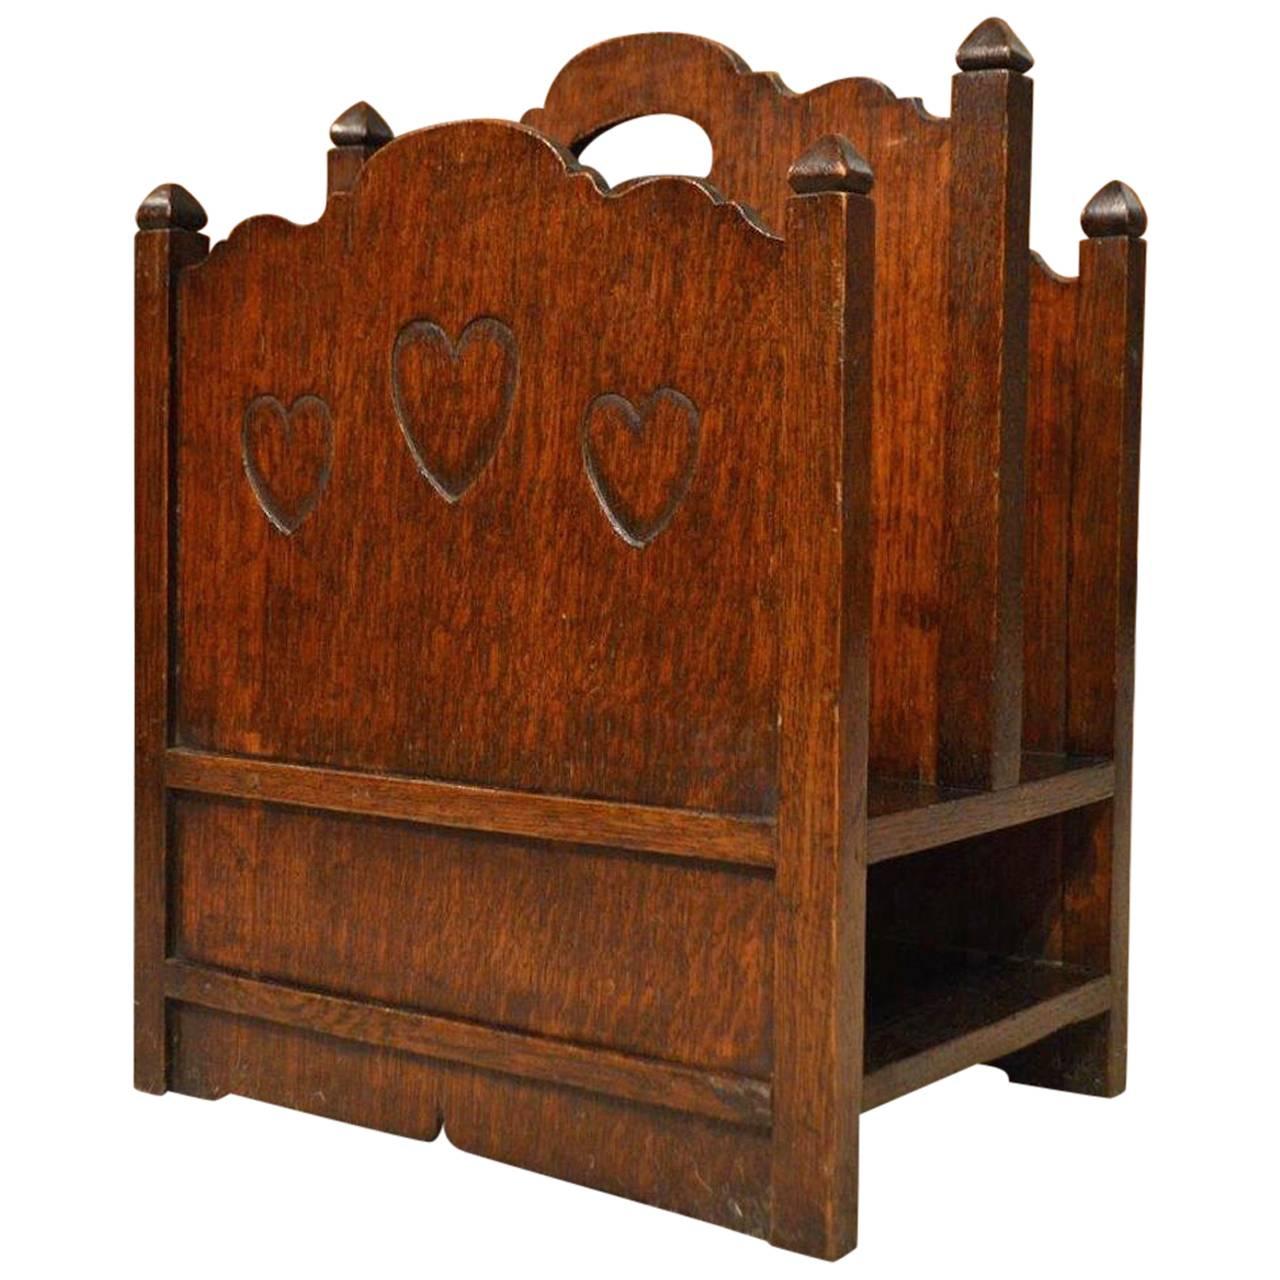 Oak Arts & Crafts Period Magazine Rack Possibly by Liberty's